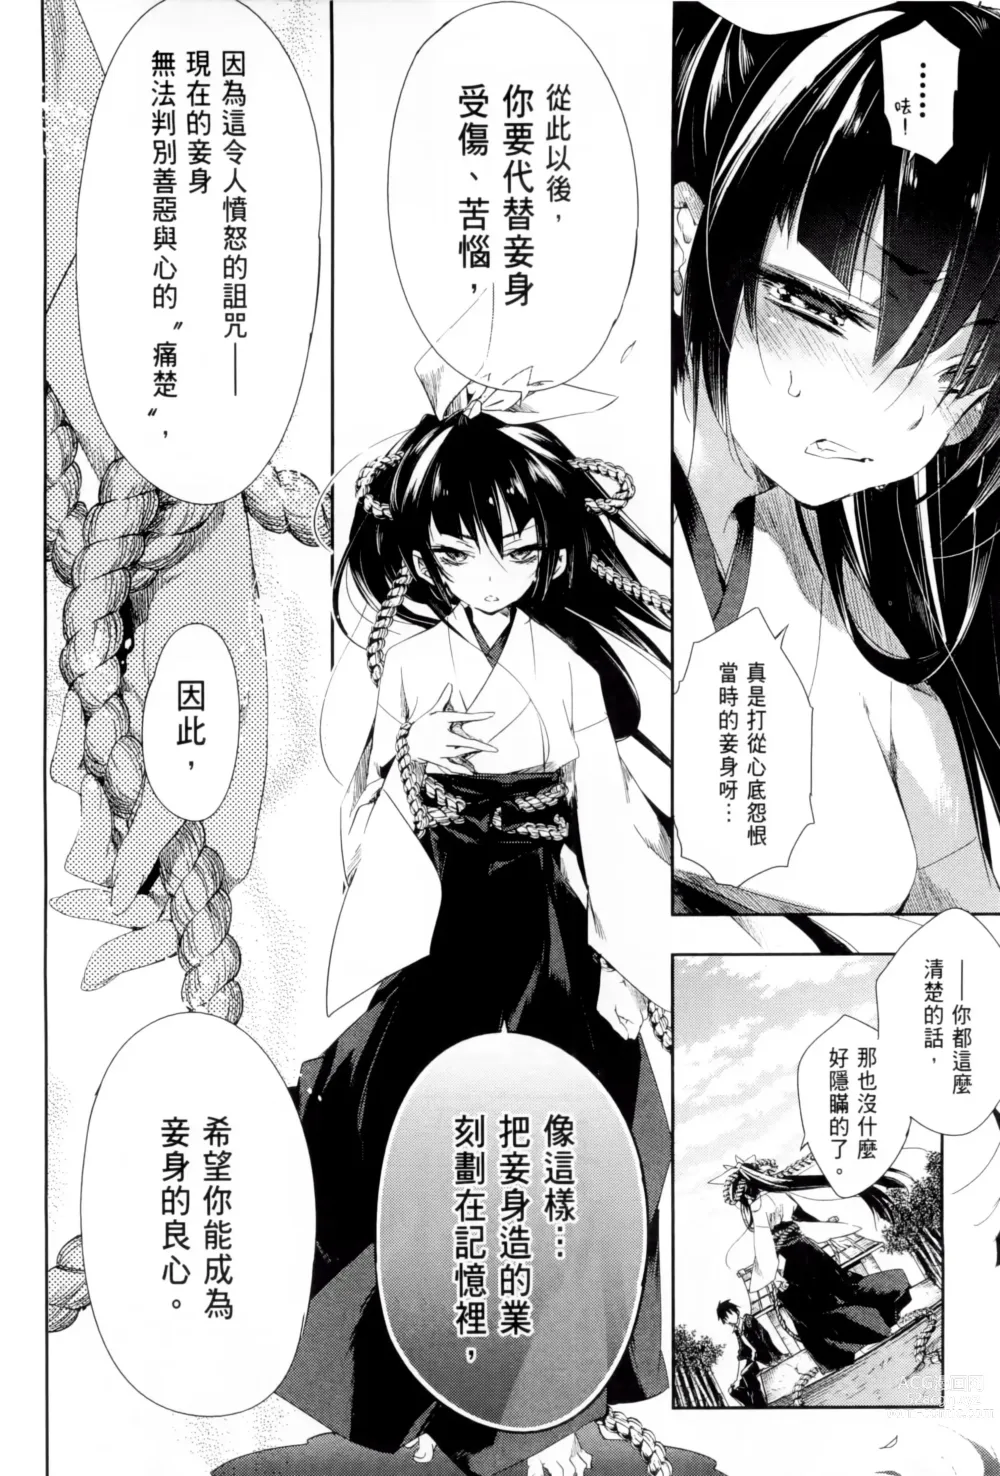 Page 183 of manga 神さまの怨結び 第1巻